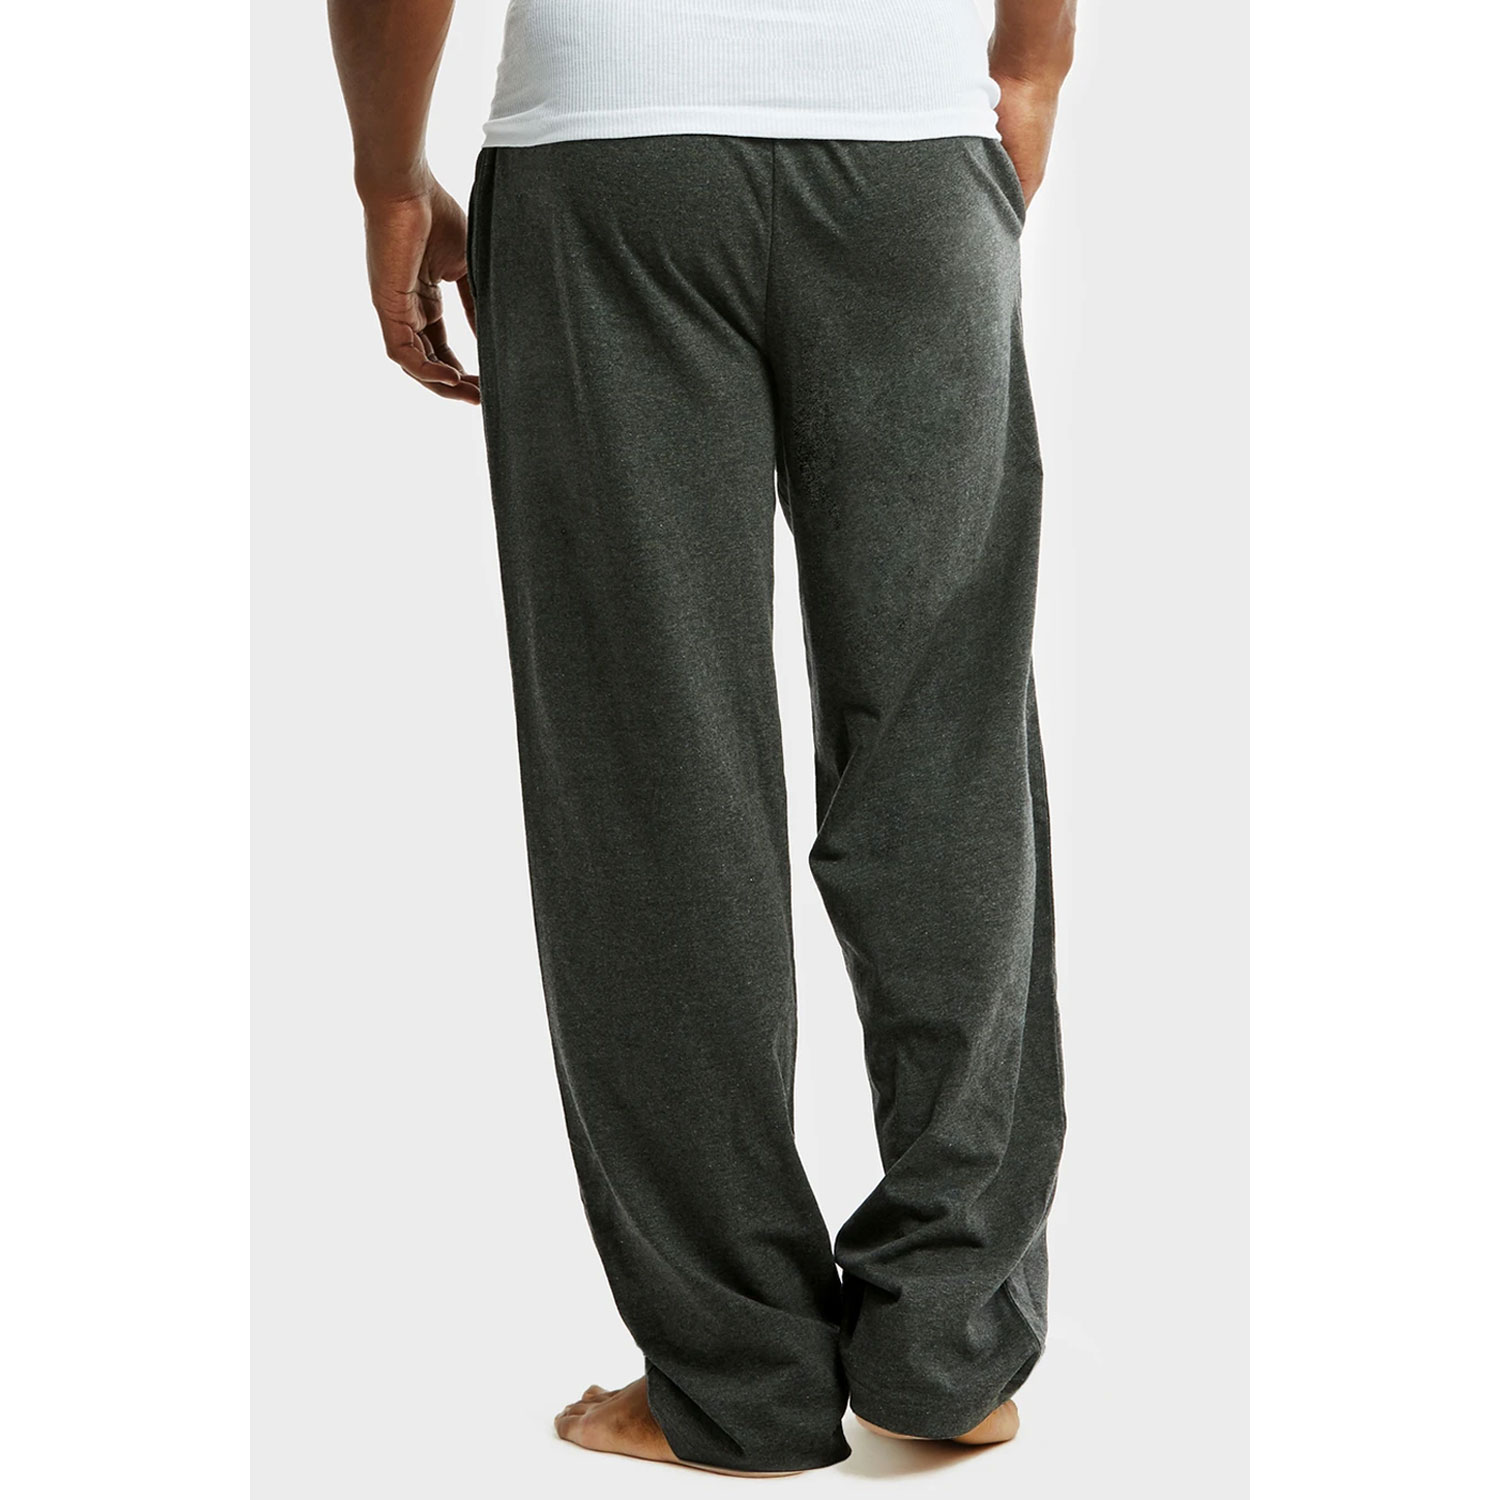 Cottonbell Men's Knitted Pajama Pants